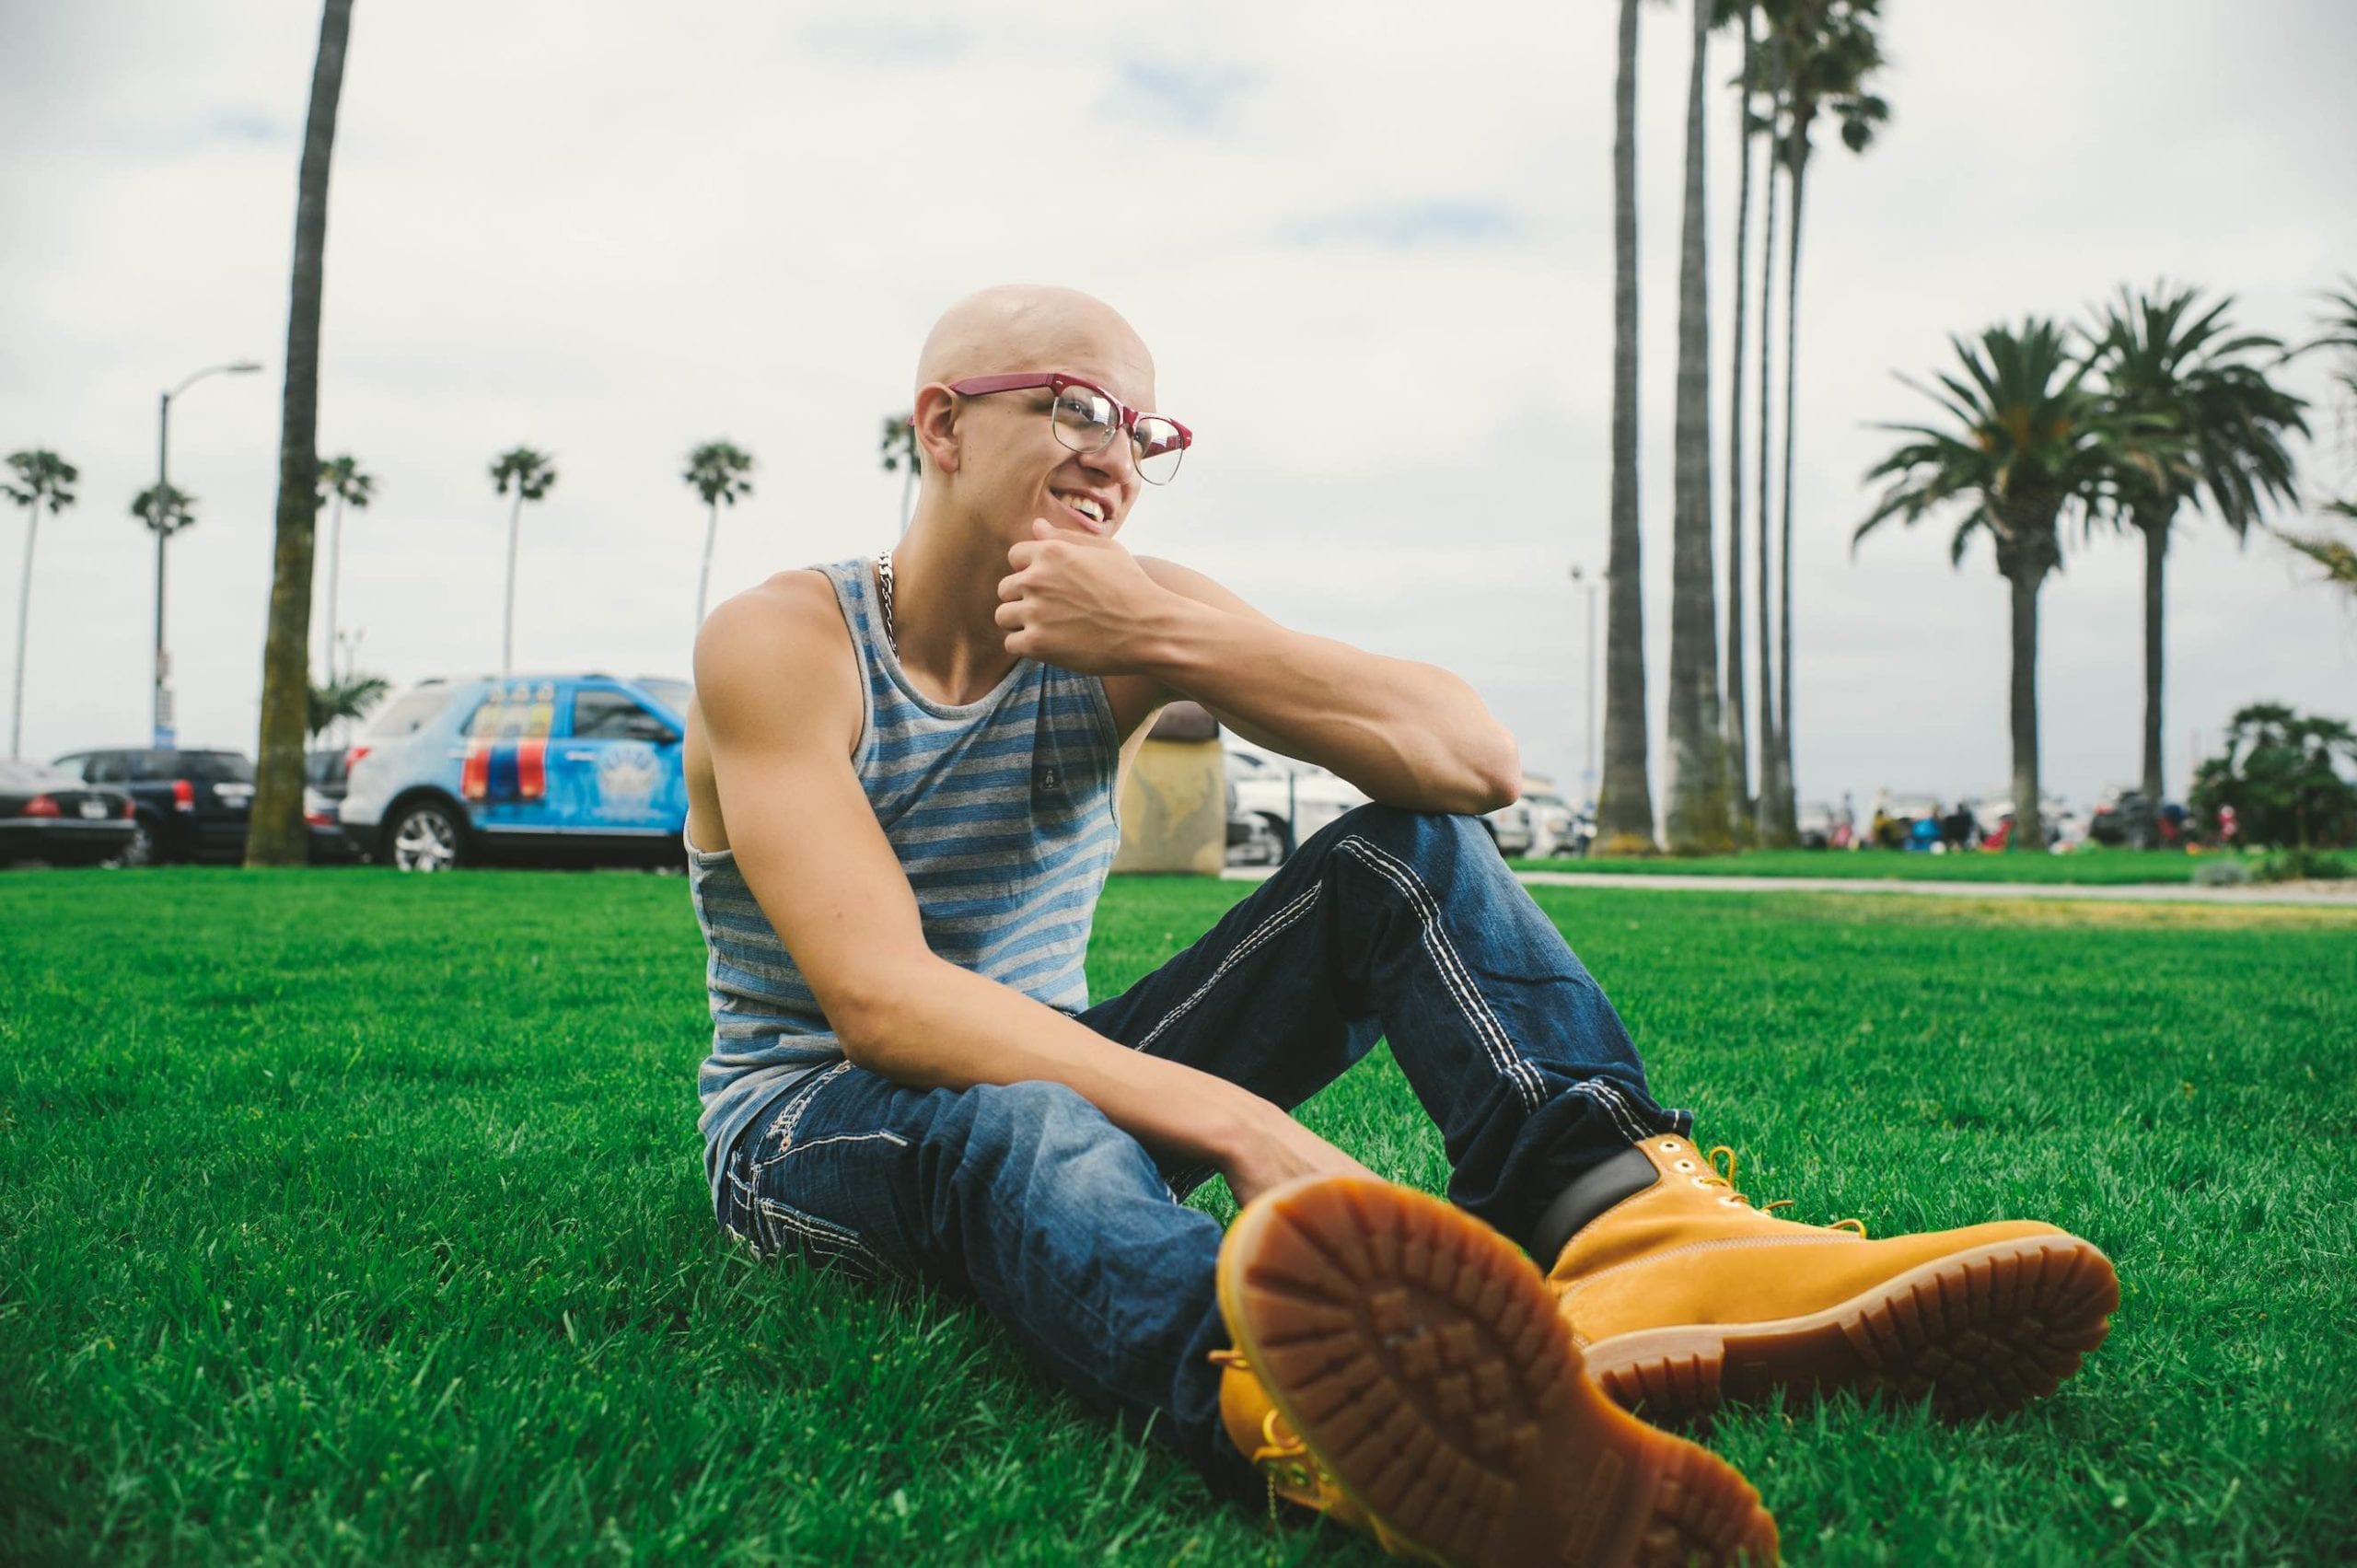 Sammy C Bald man wearing blue and white striped tank top, blue jeans, red glasses and beige work shoes sitting in the grass with palm trees and cars in the background